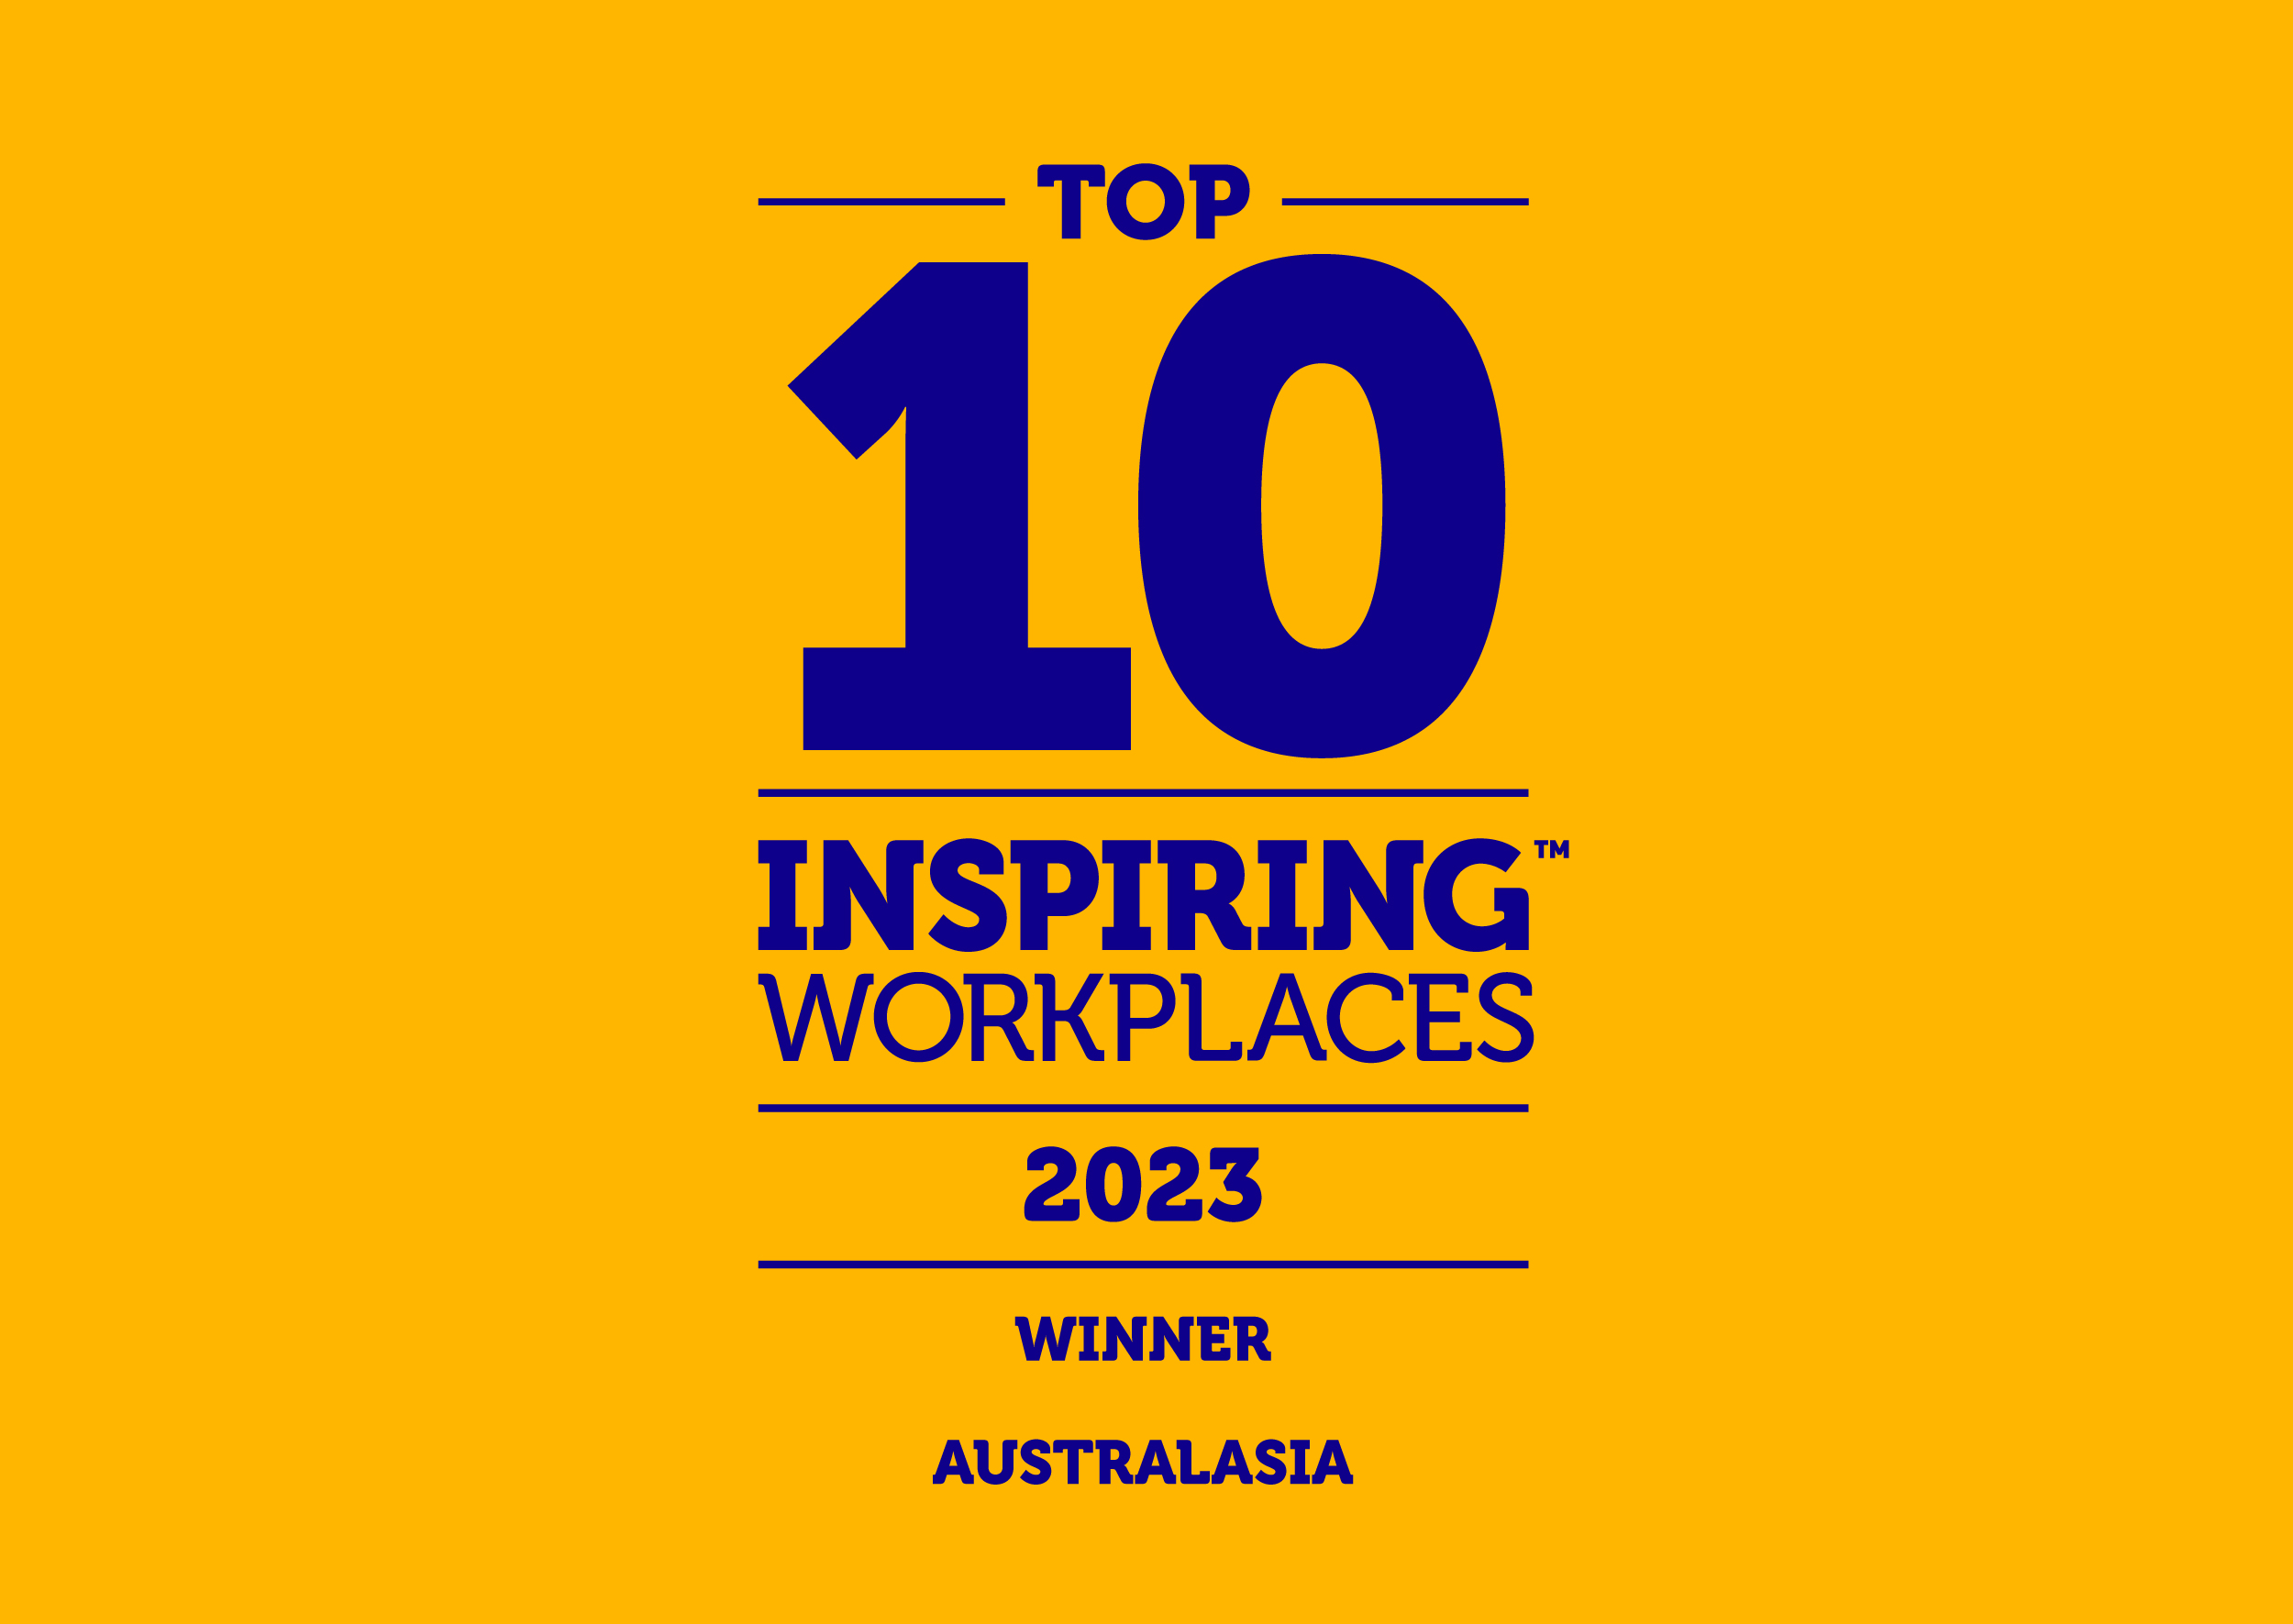 Inaugural Inspiring Workplaces announced in Australasia